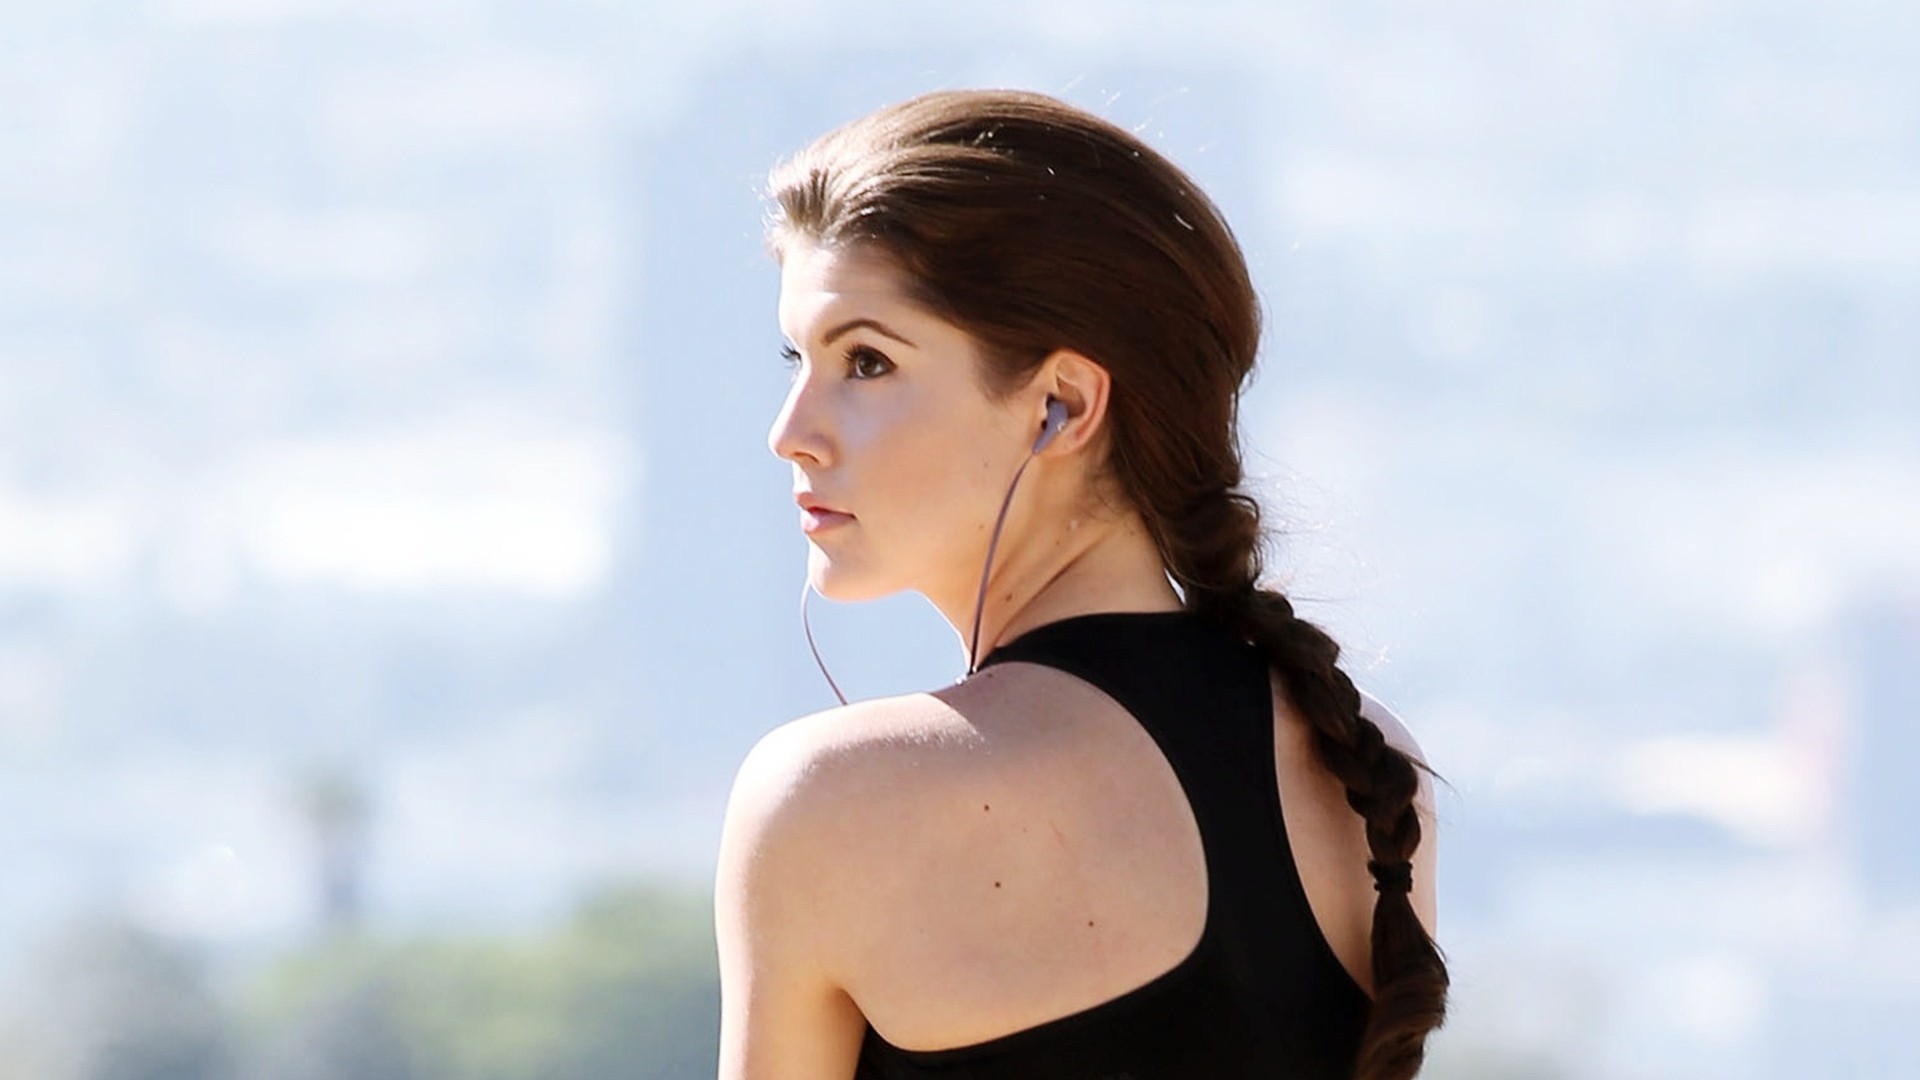 Amanda Cerny Wallpapers Images Photos Pictures Backgrounds